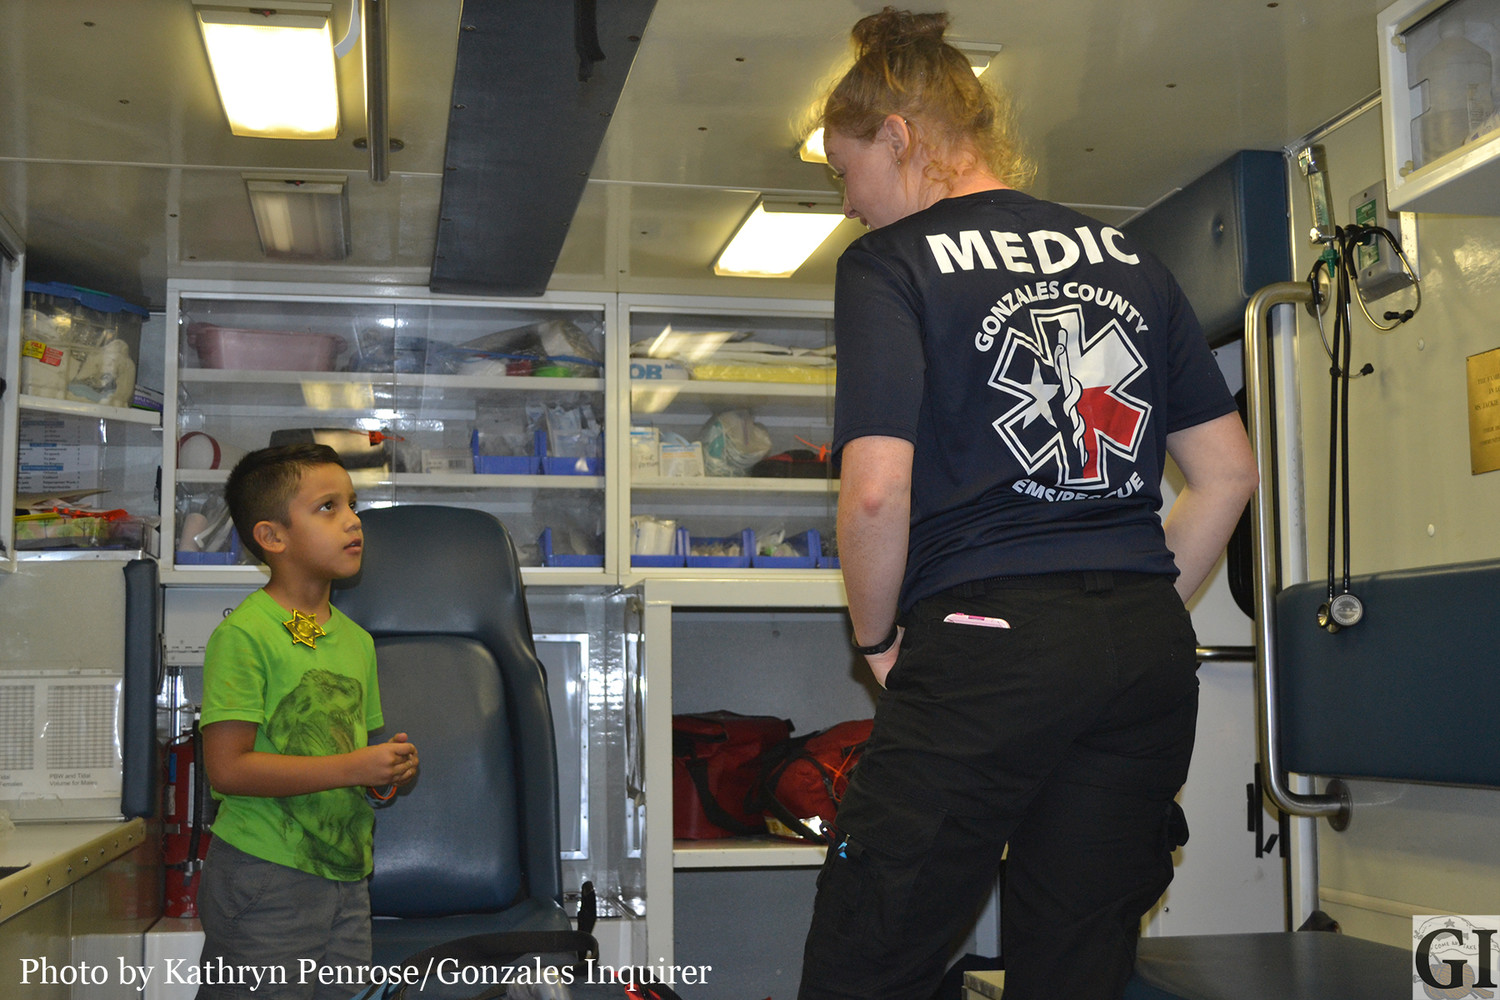 TJ Garza got a tour of a Gonzales County Emergency Medical Services Rescue Unit, during National Night Out Tuesday night. EMT Christine Brown showed the inquisitive youngster the unit and talked to him about emergency services.